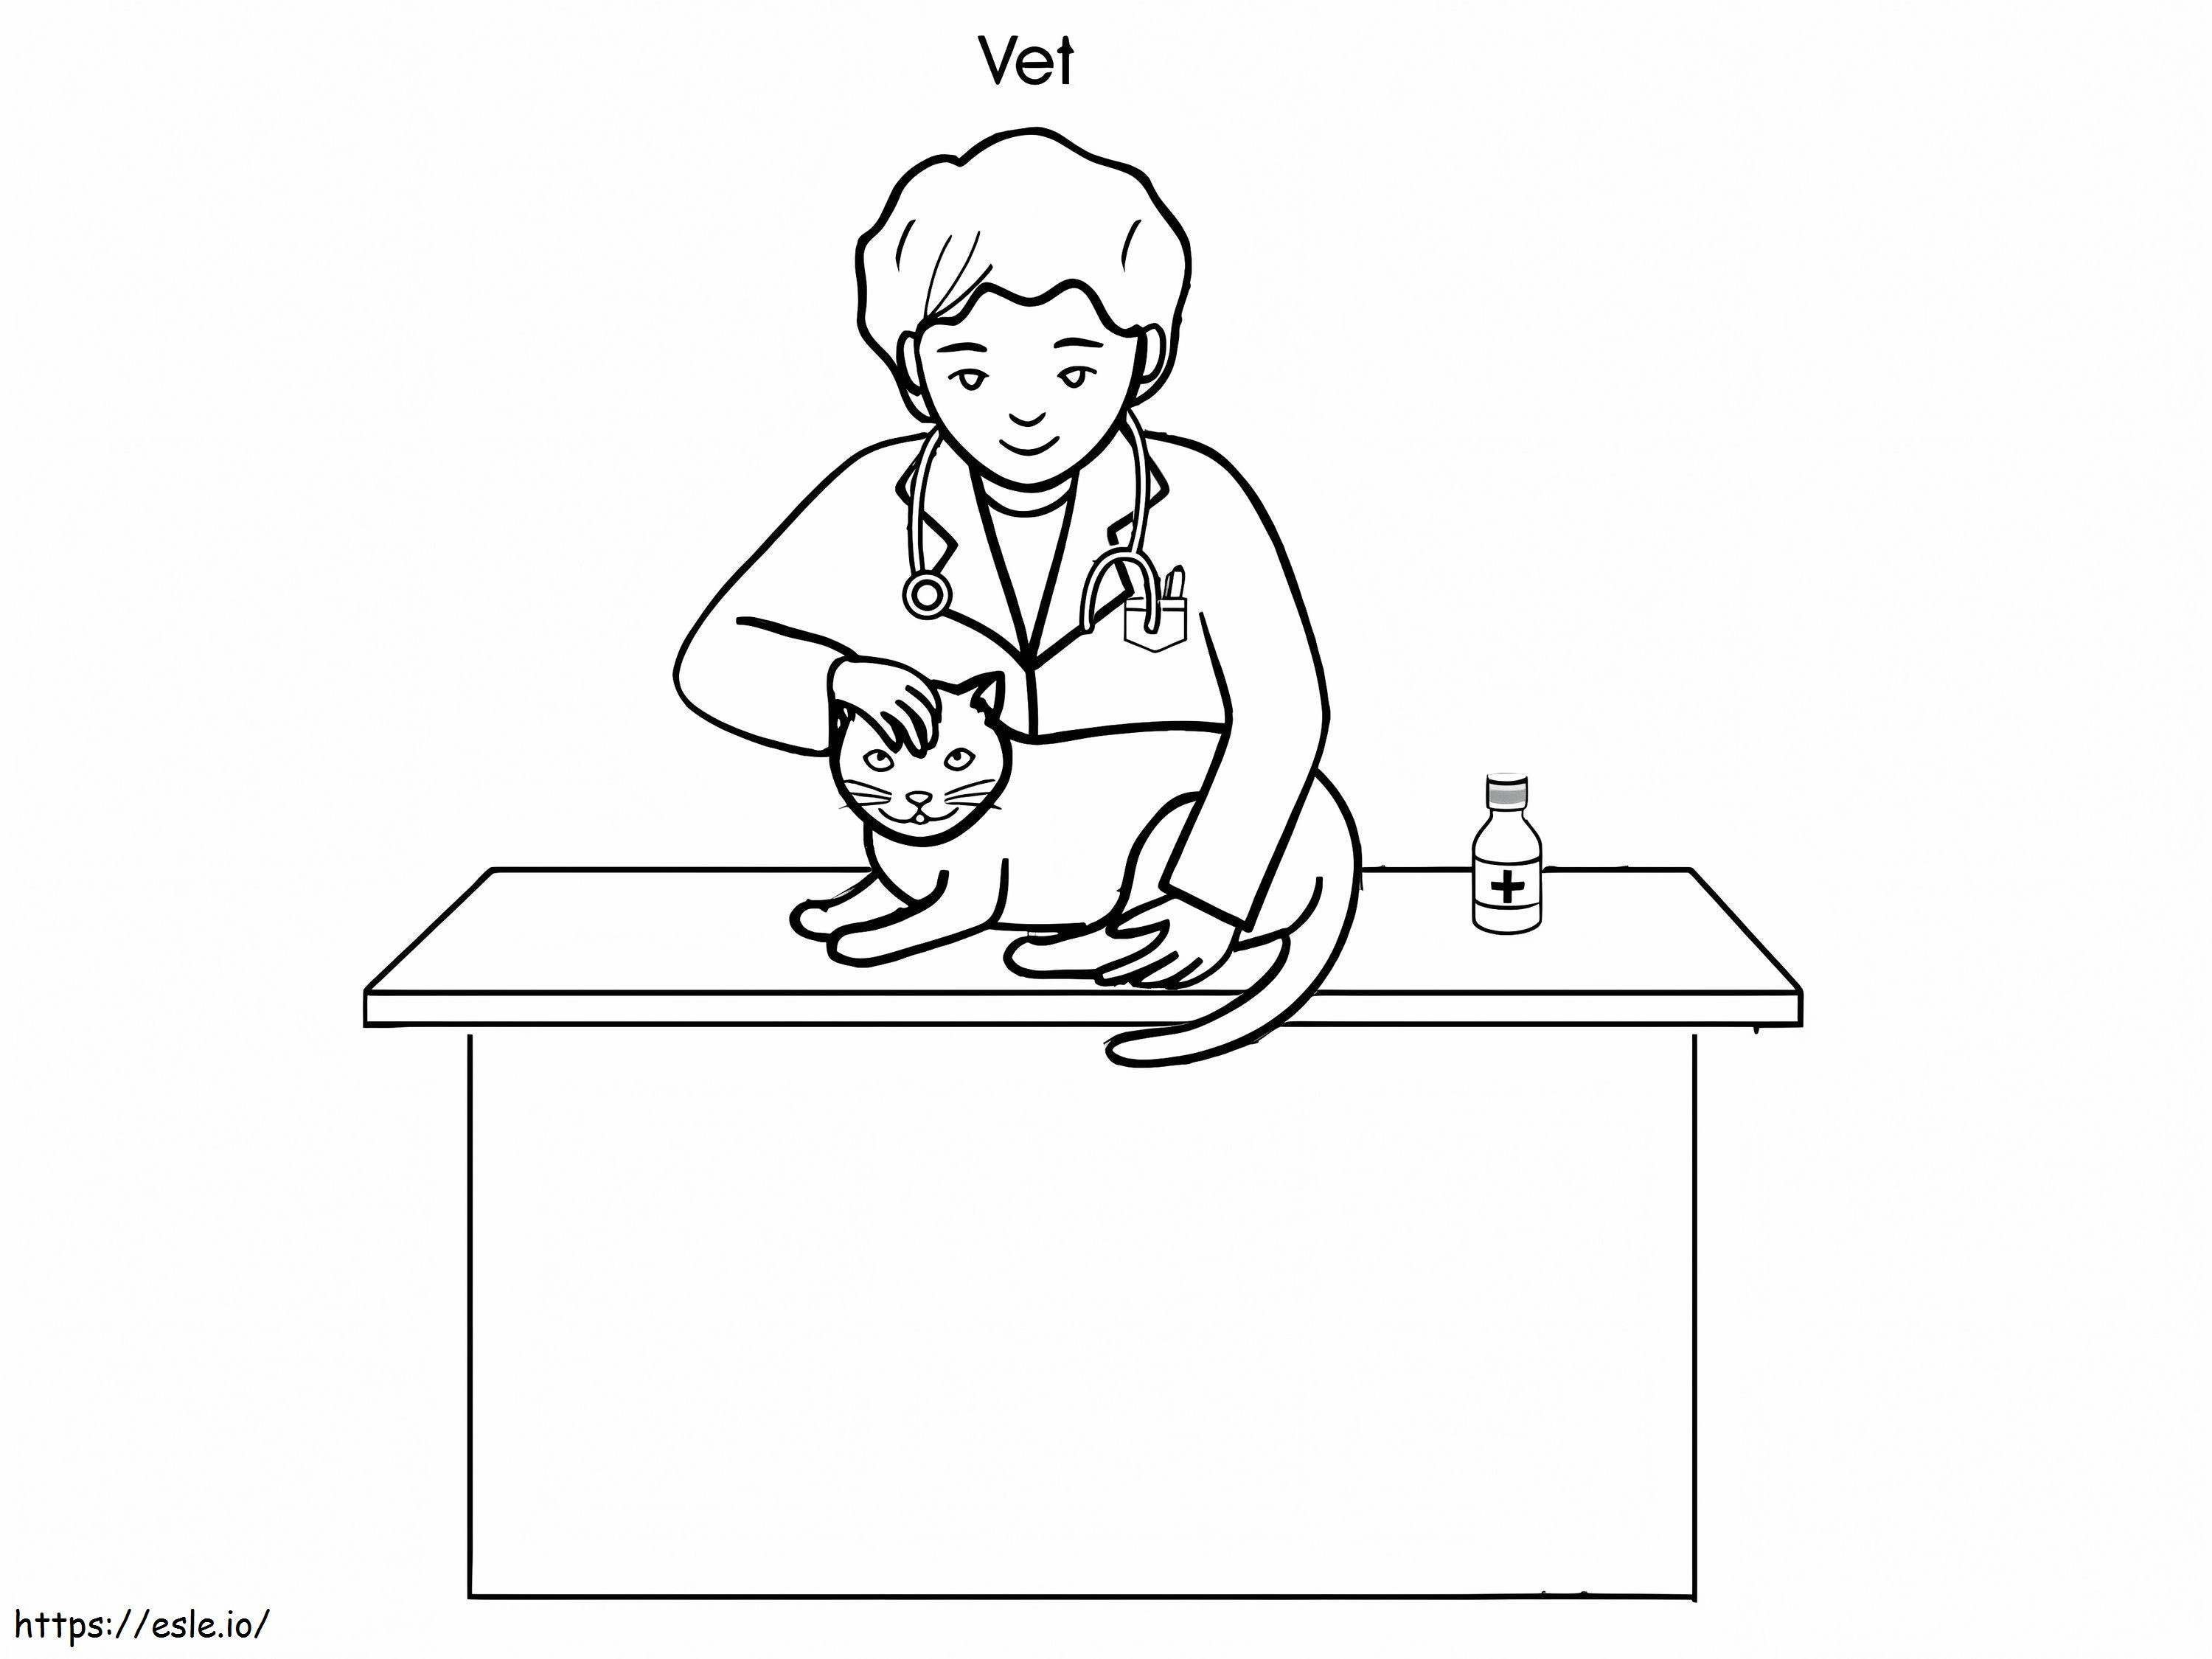 Vet coloring page